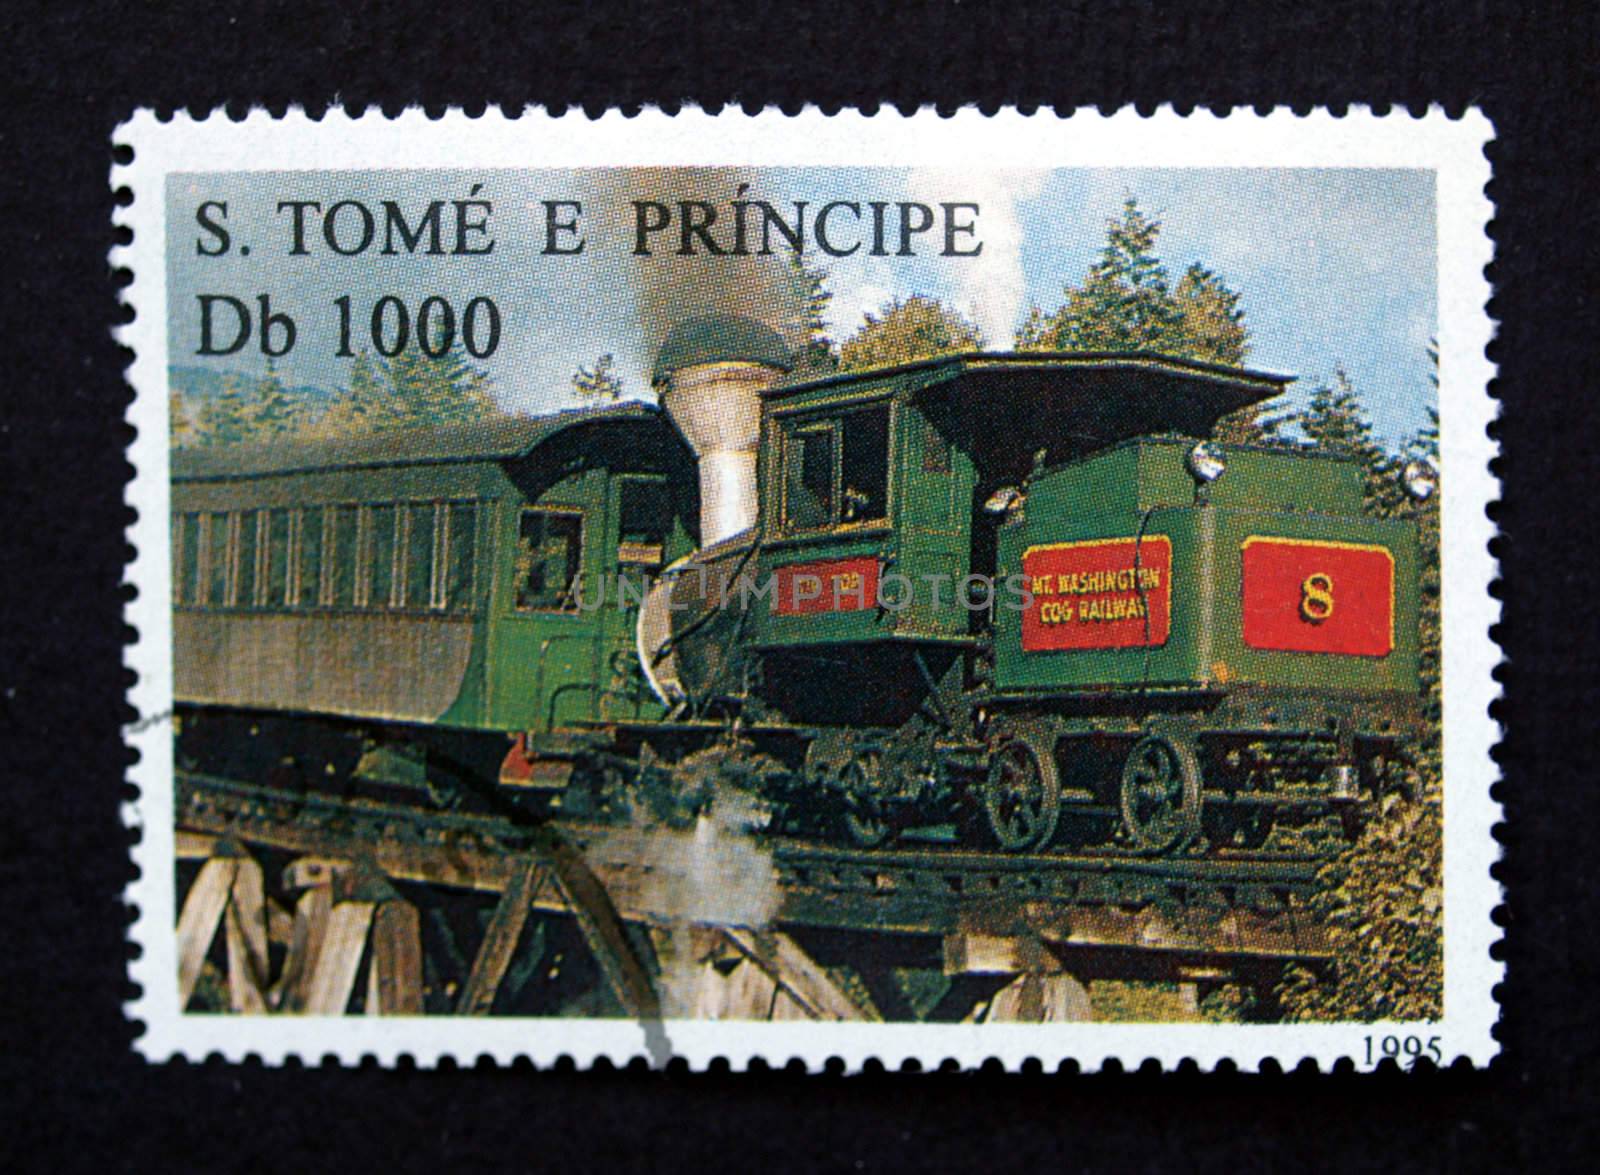 S Tome and Principe stamp with train on black